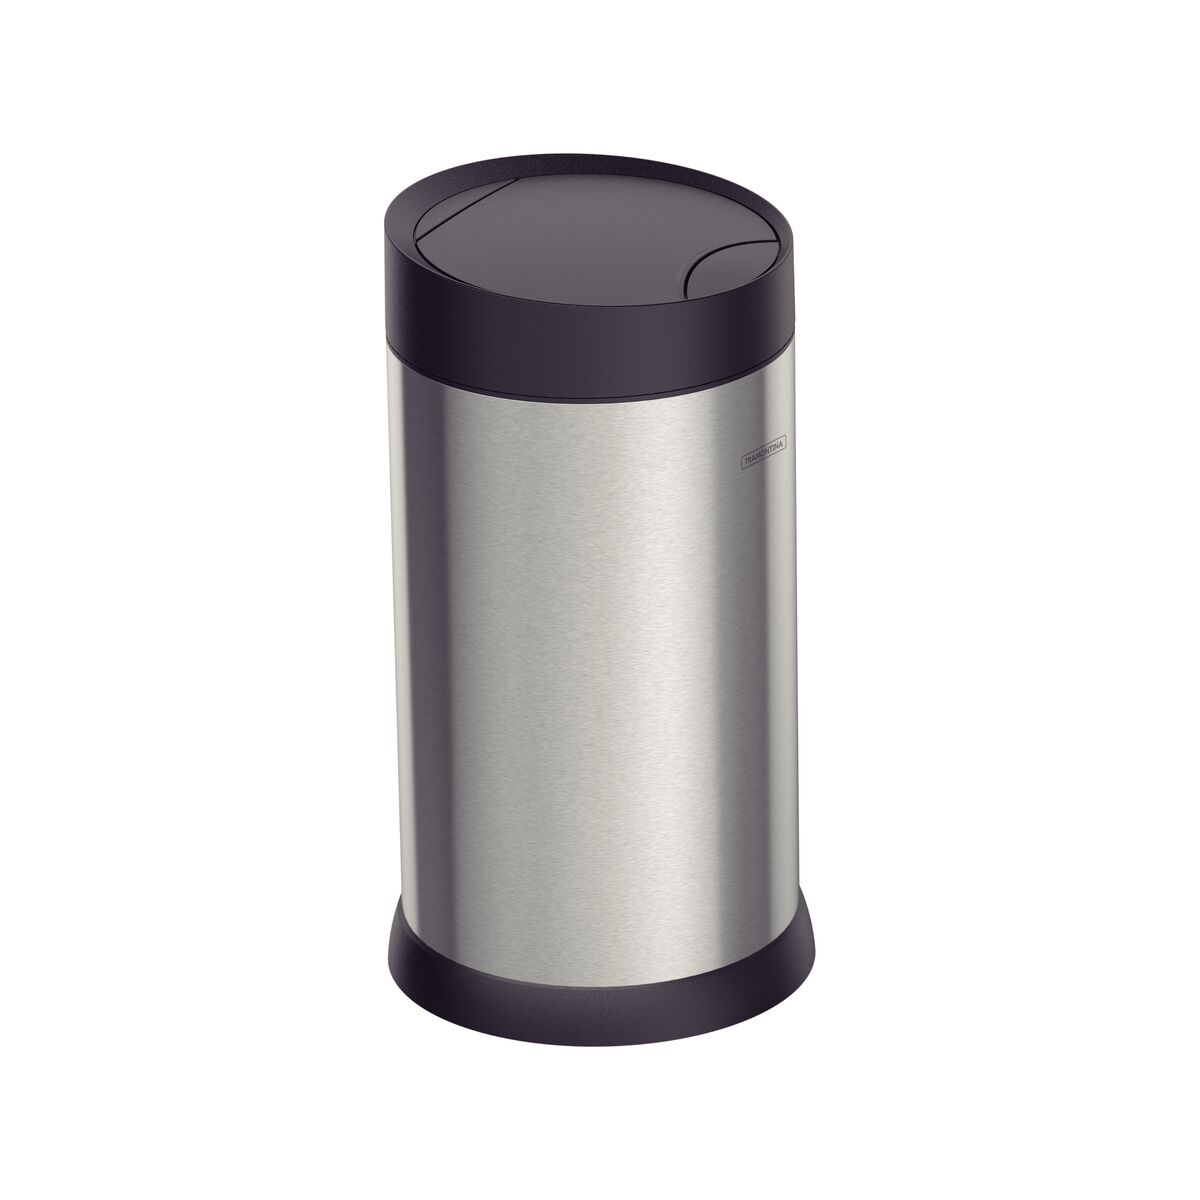 Tramontina 12 L stainless steel automatic trash bin with sensor and a Scotch Brite finish